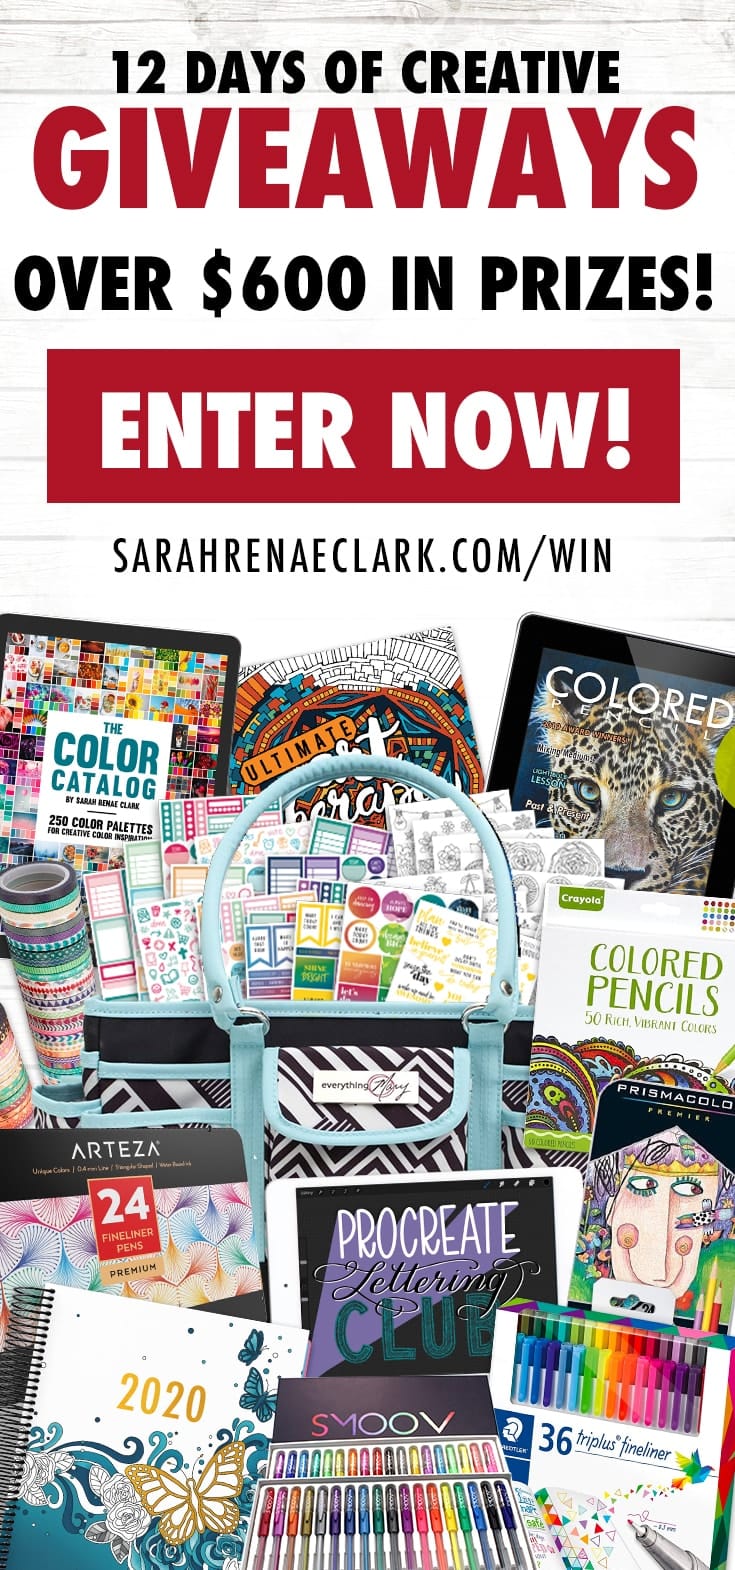 12 Days of Creative Giveaways: Over $600 in prizes to be won